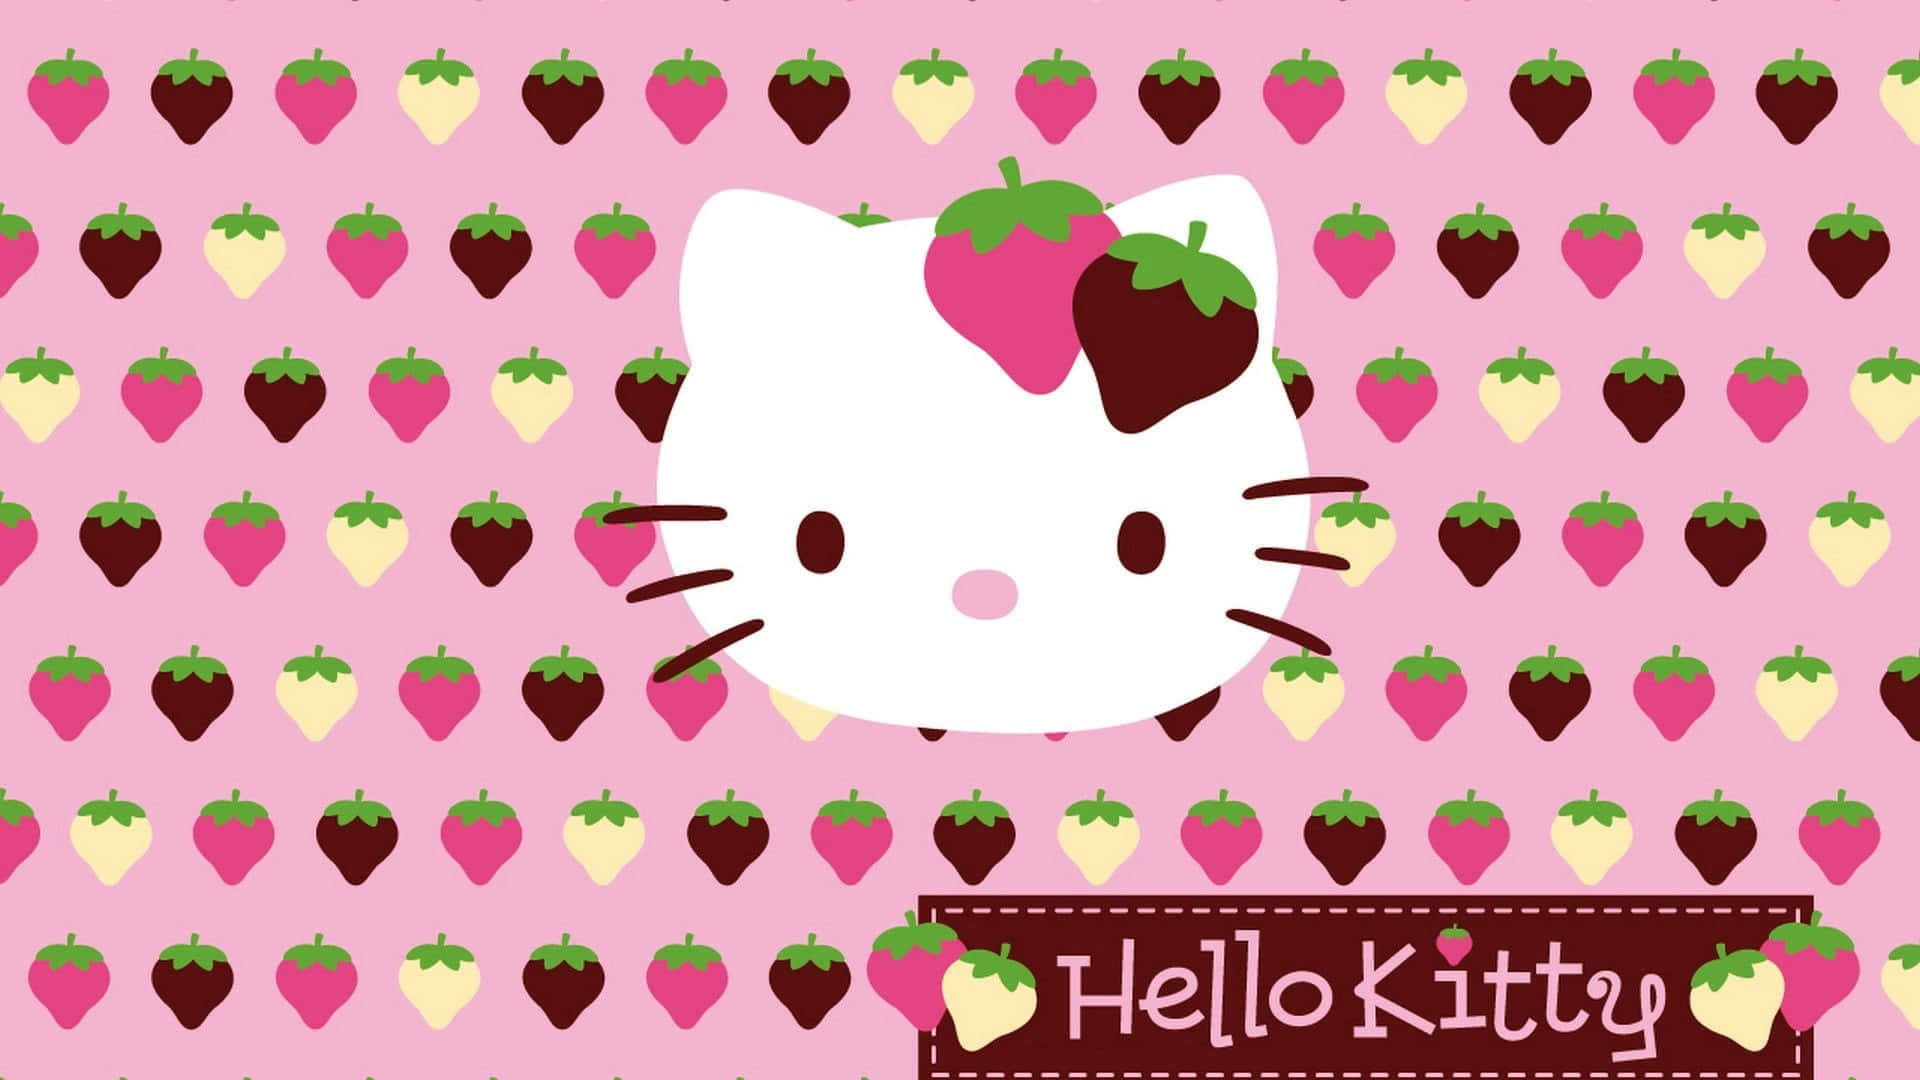 Hello Kitty Against Strawberry Patterns Background